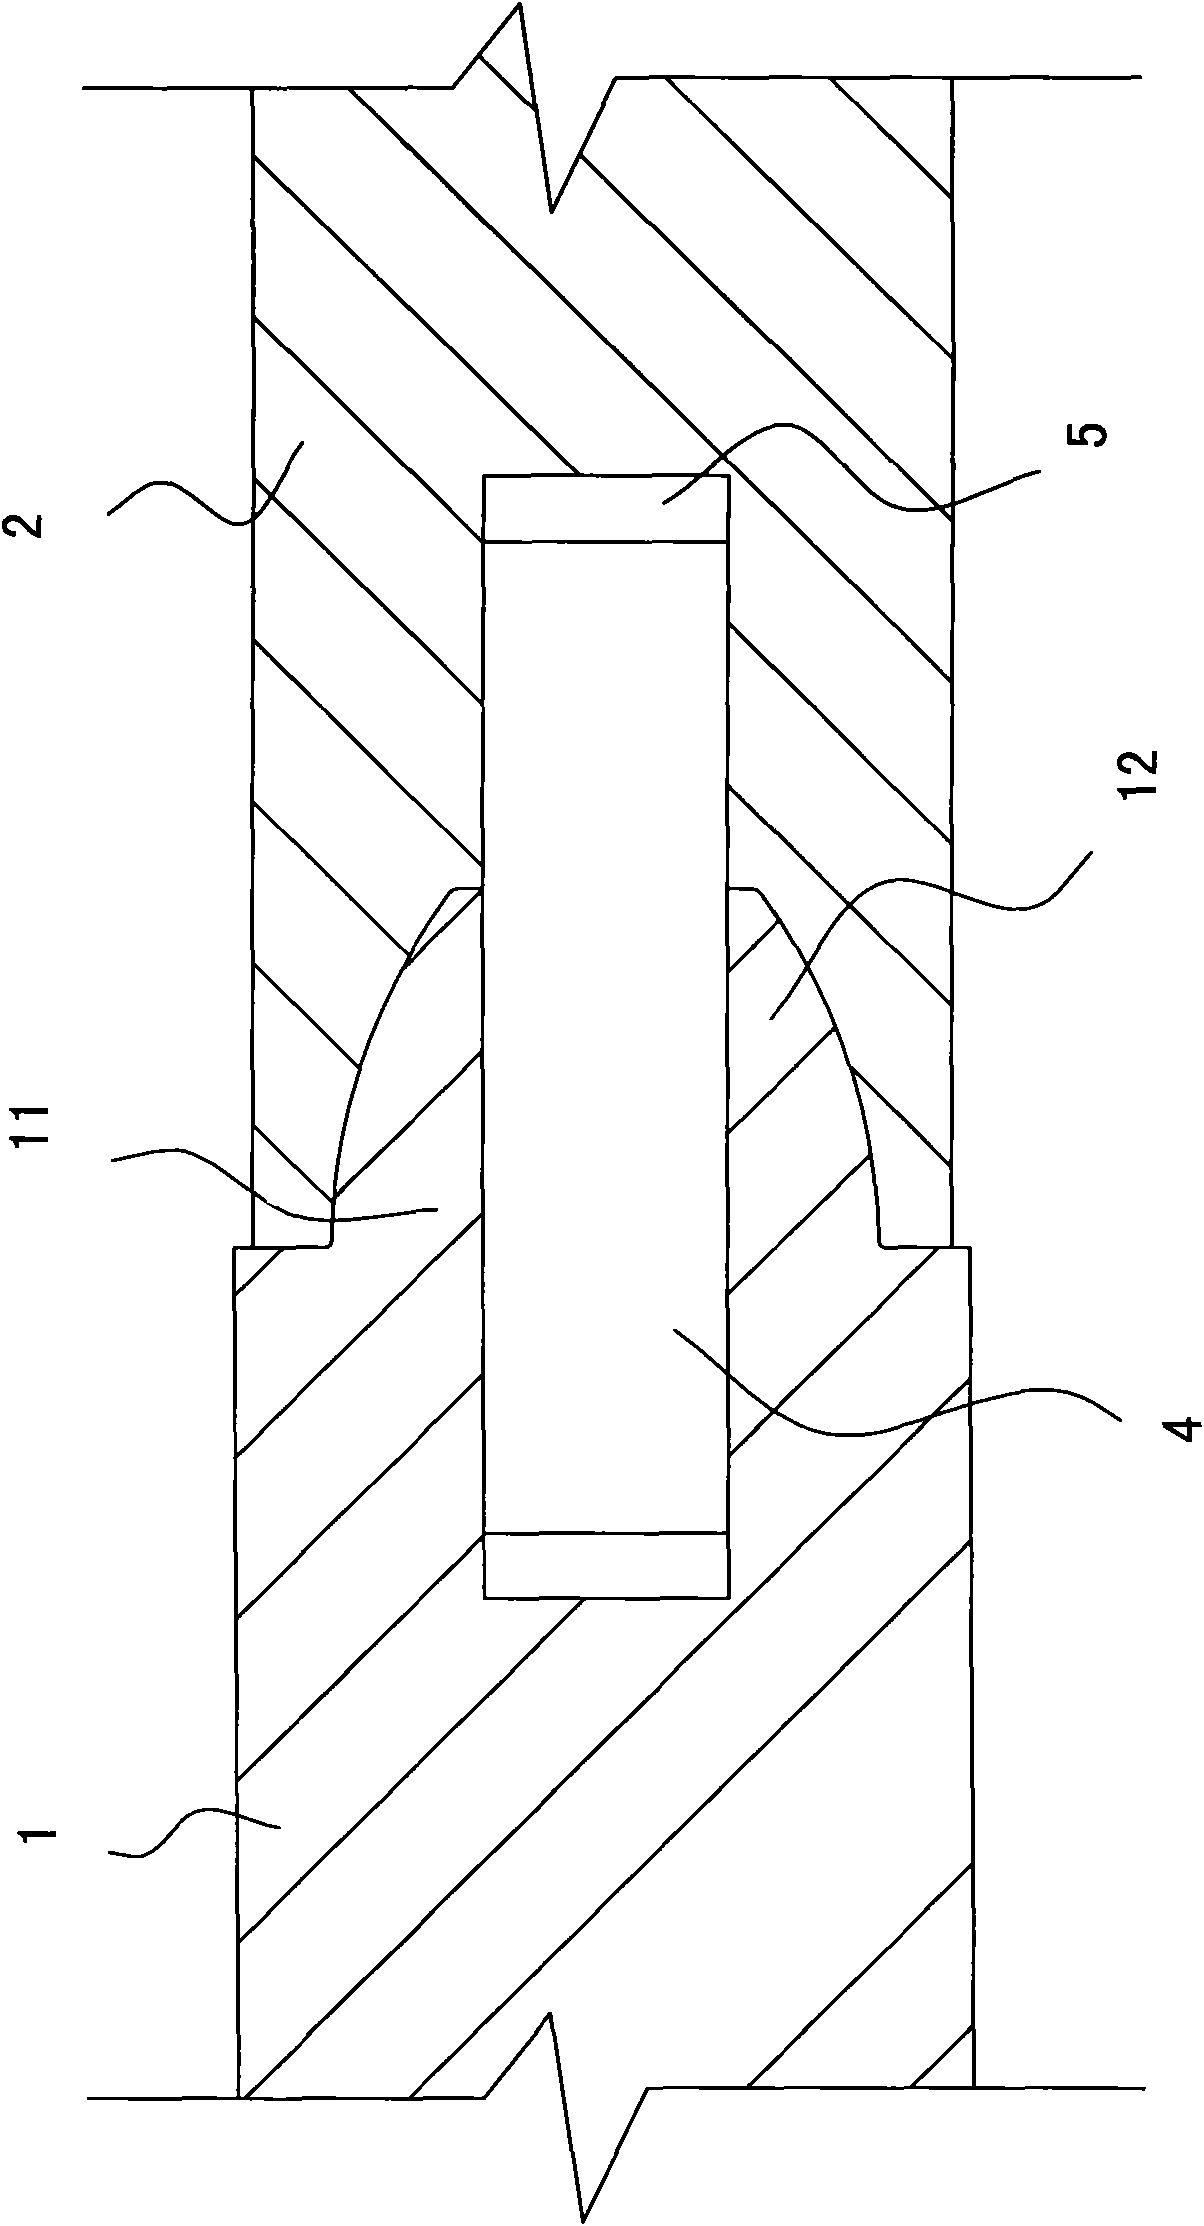 Slot mortise coupling structure